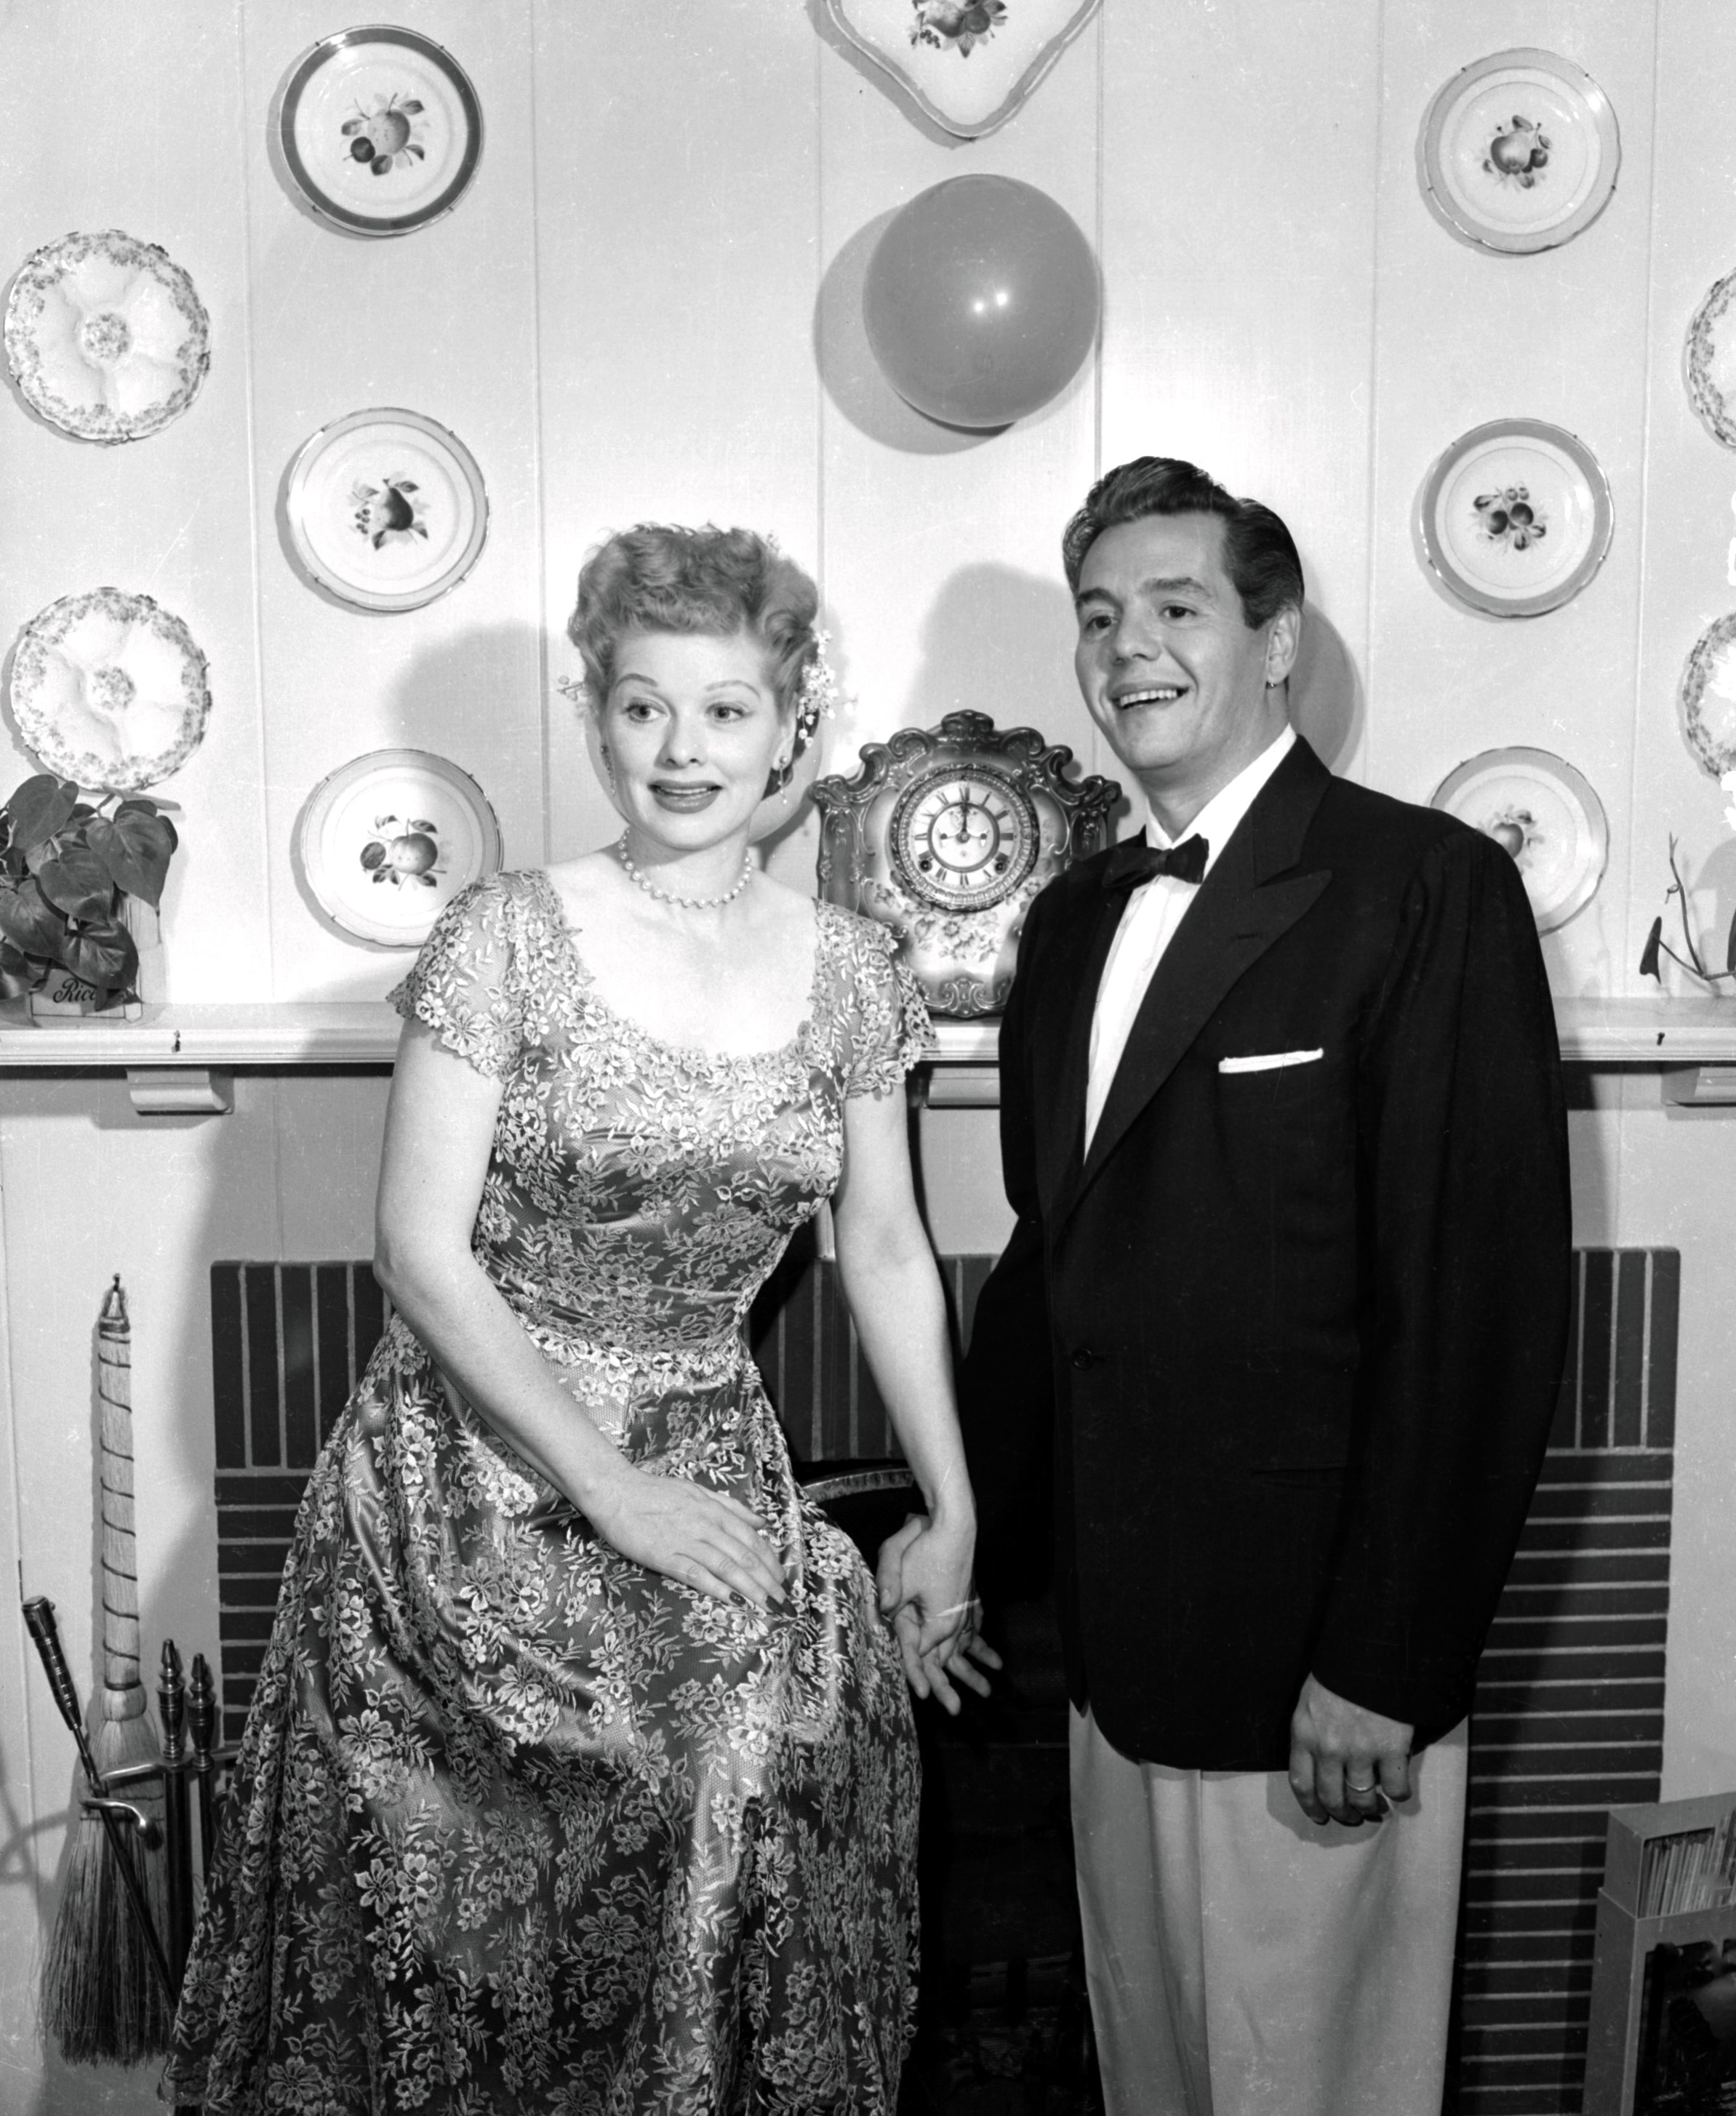 Lucille Ball and Desi Arnaz pose in their home for a promotional photo